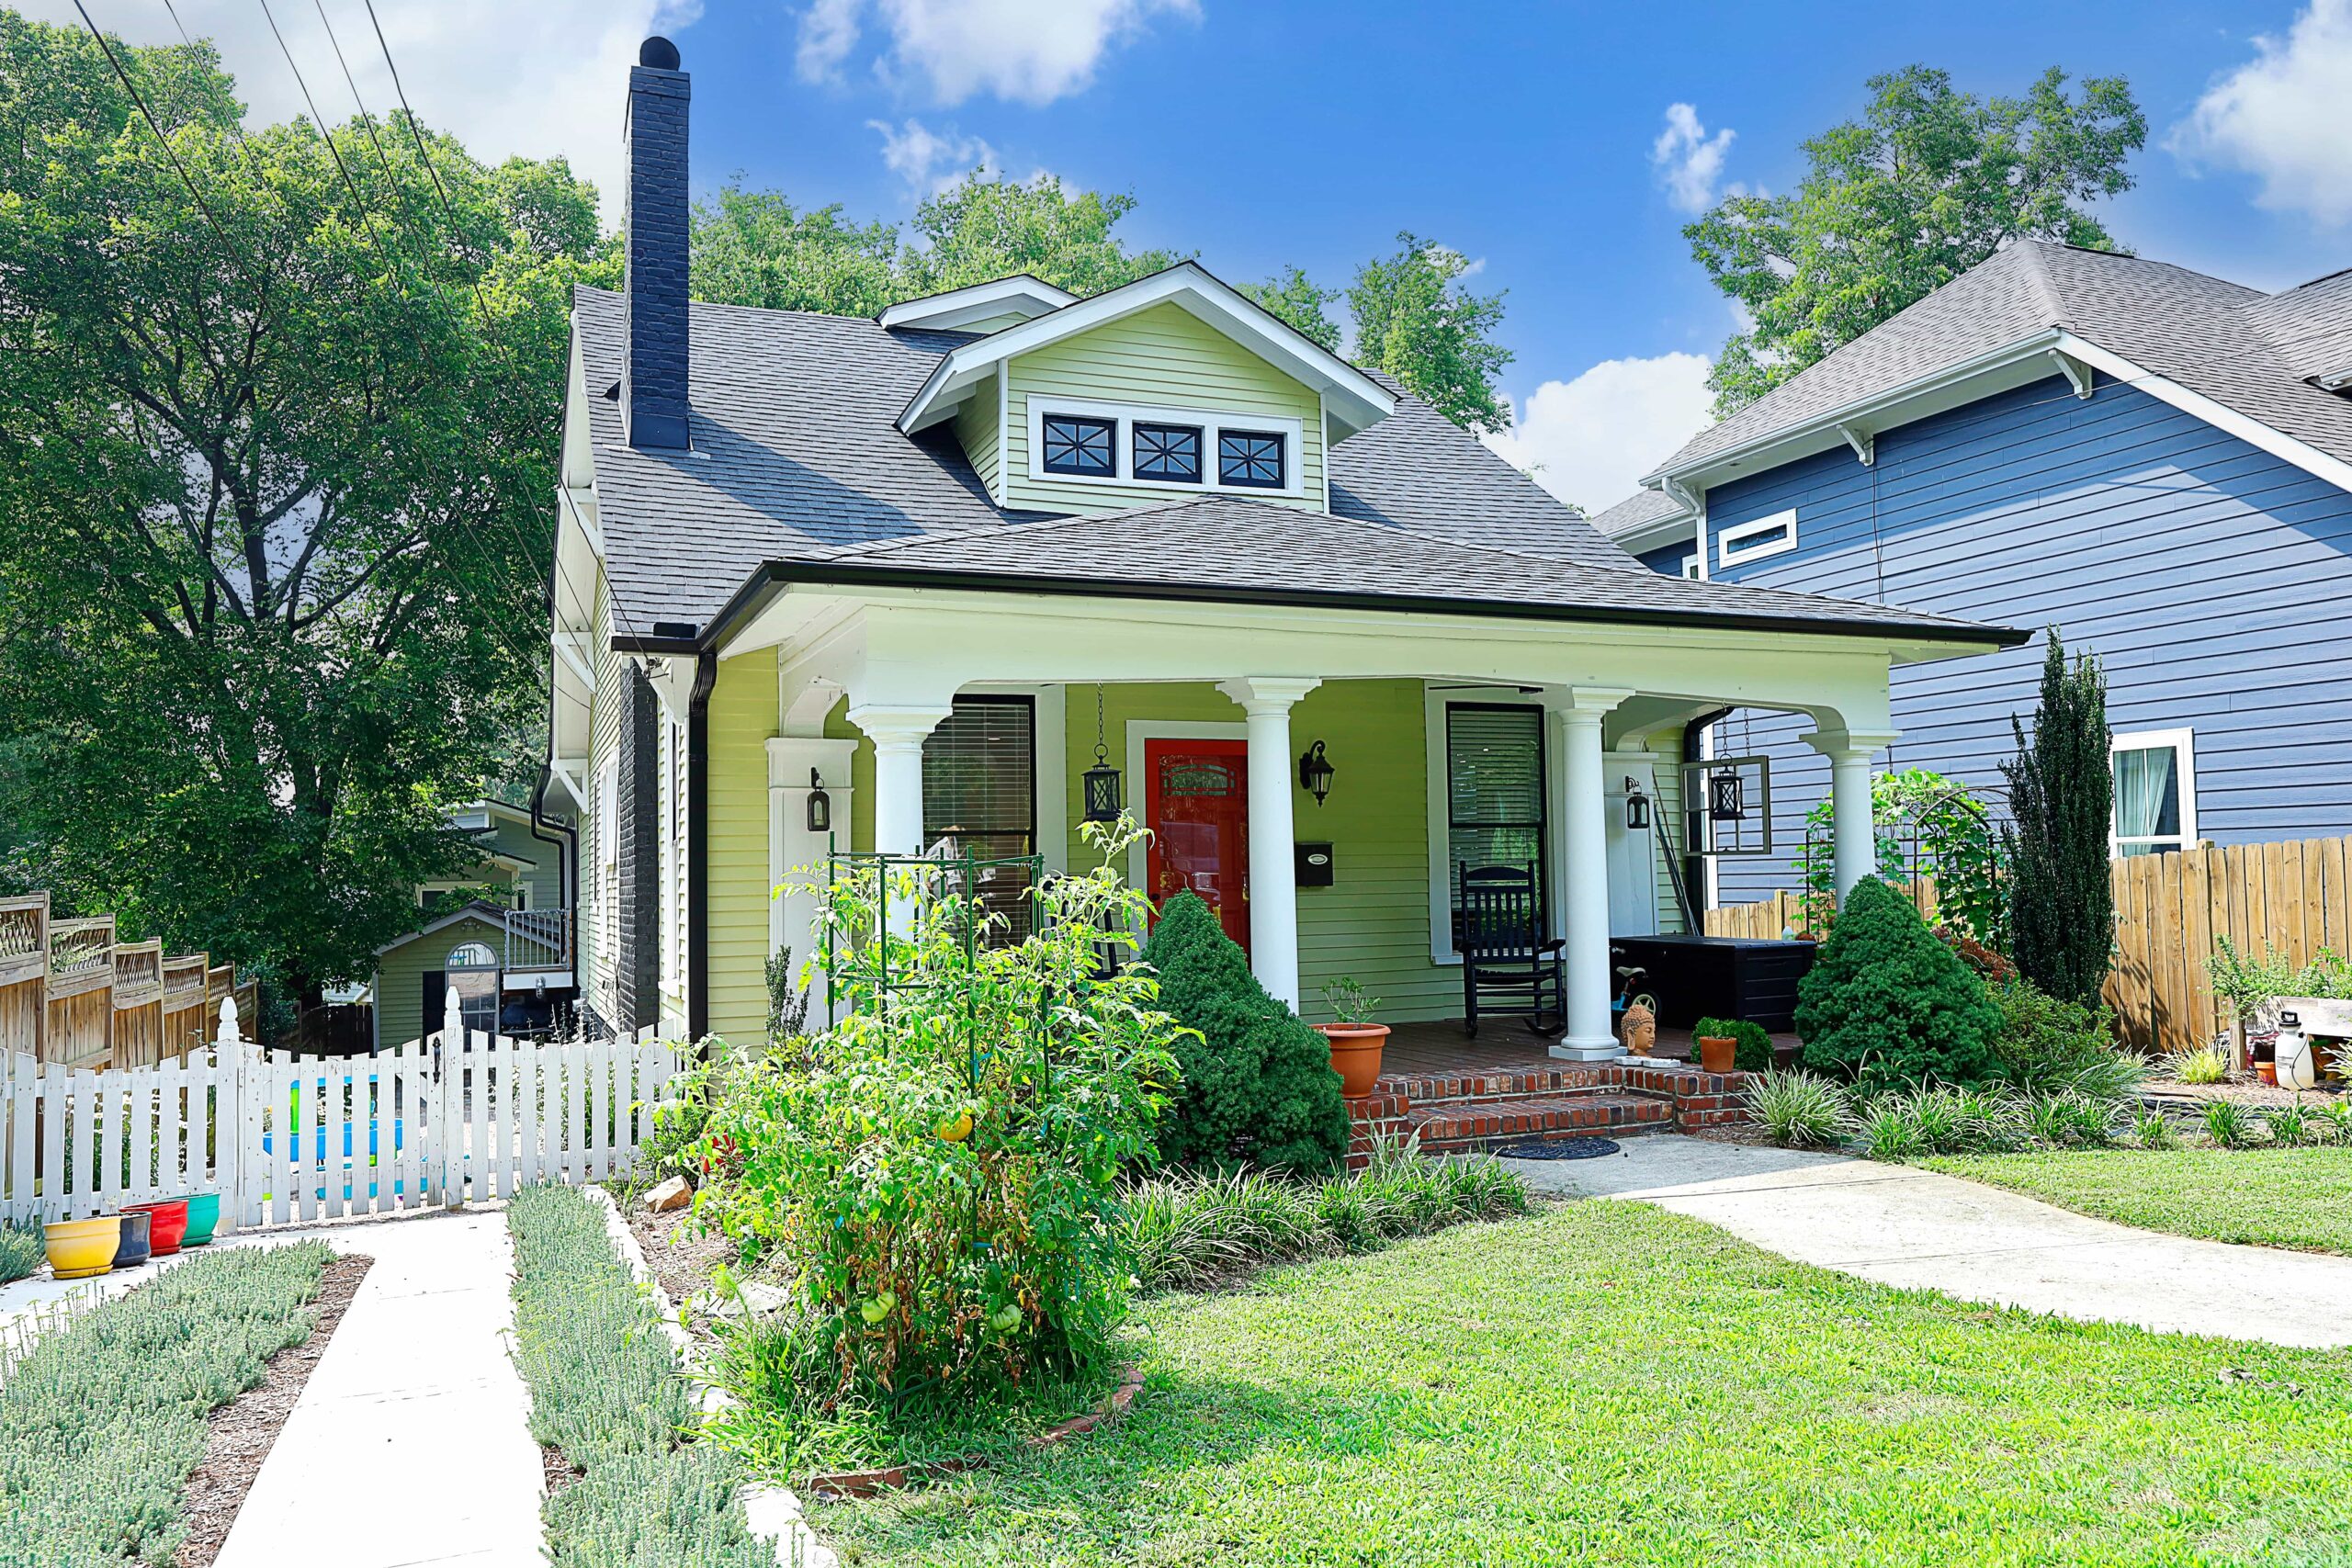 A view of the front of the bungalow style house. Green siding, a red door, a deep front porch, and a thriving garden add to the charm of this 1920s house.